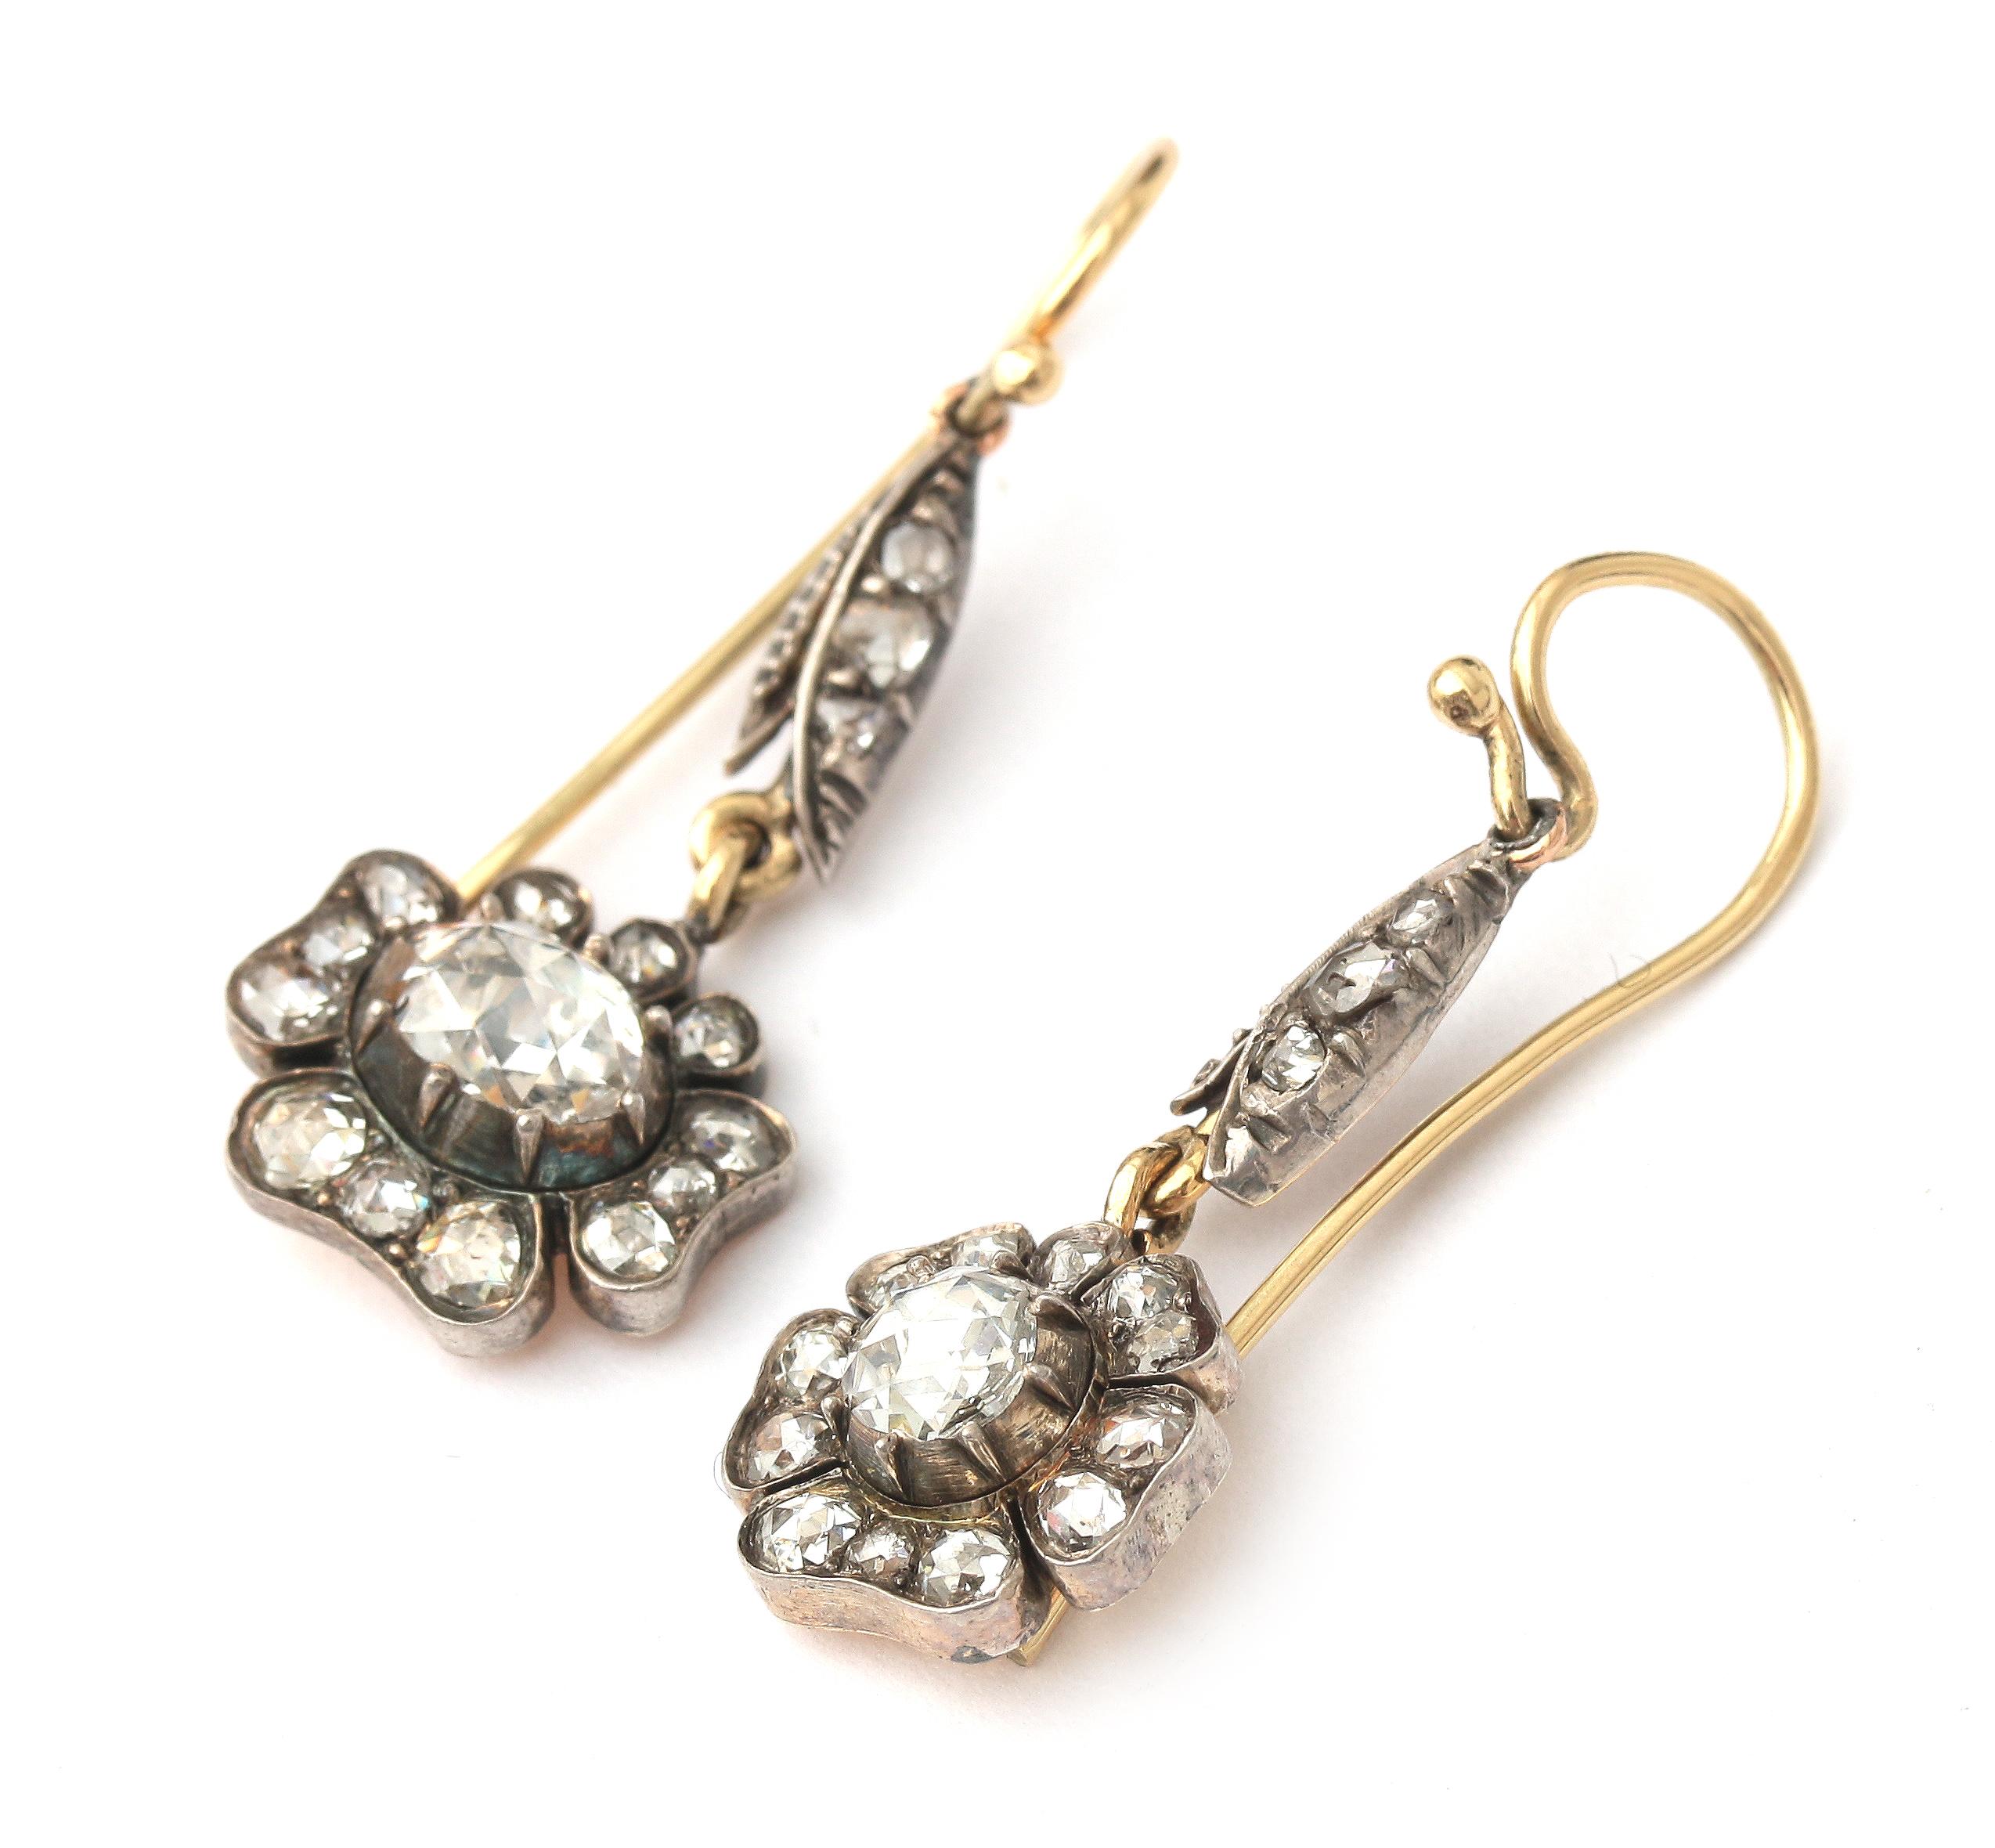 A pair of 14 karat gold and silver rose cut diamond cluster earrings - Image 2 of 3